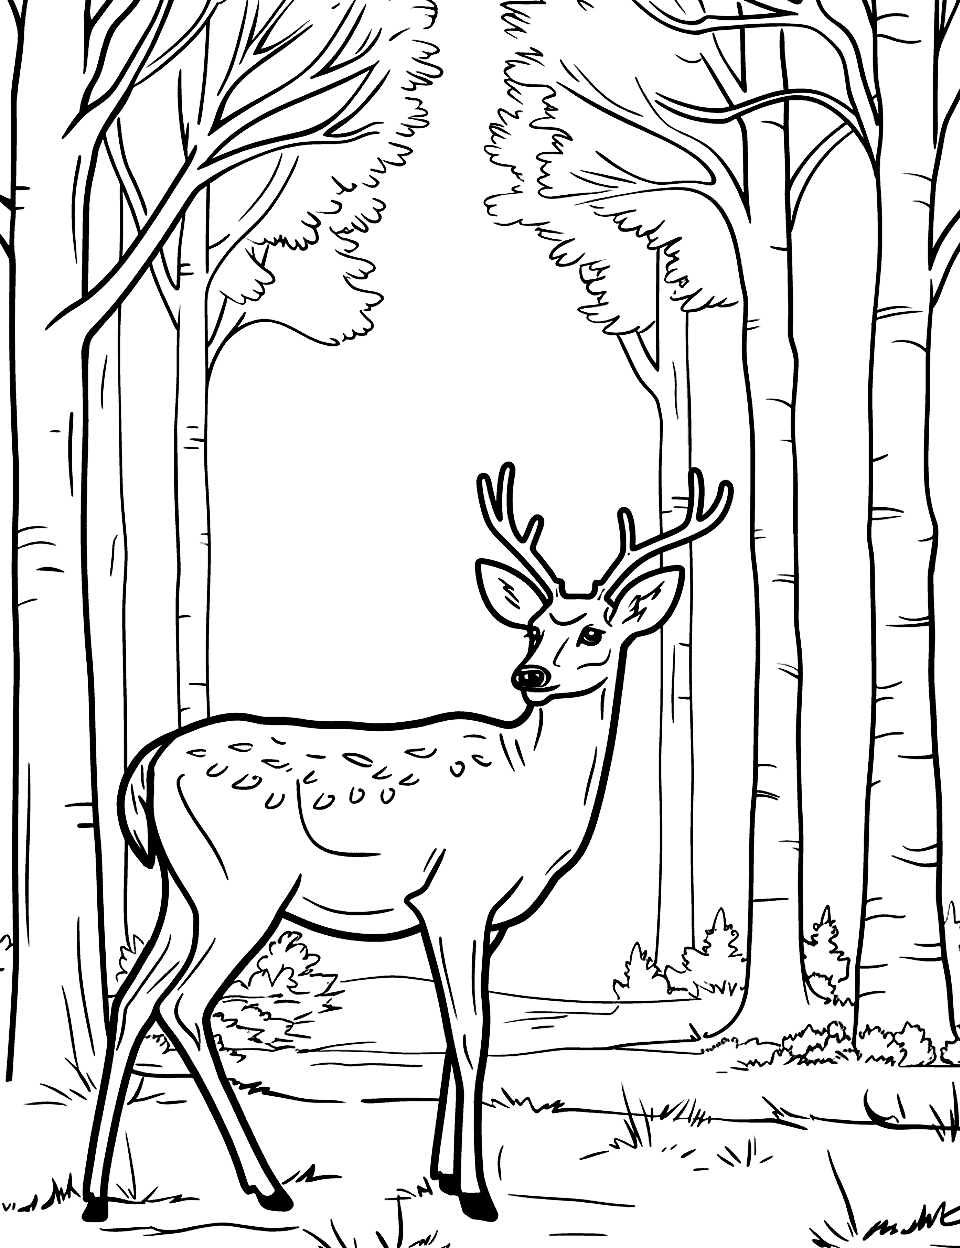 Deer Under a Canopy of Trees Coloring Page - A deer walking under a canopy of tall trees.